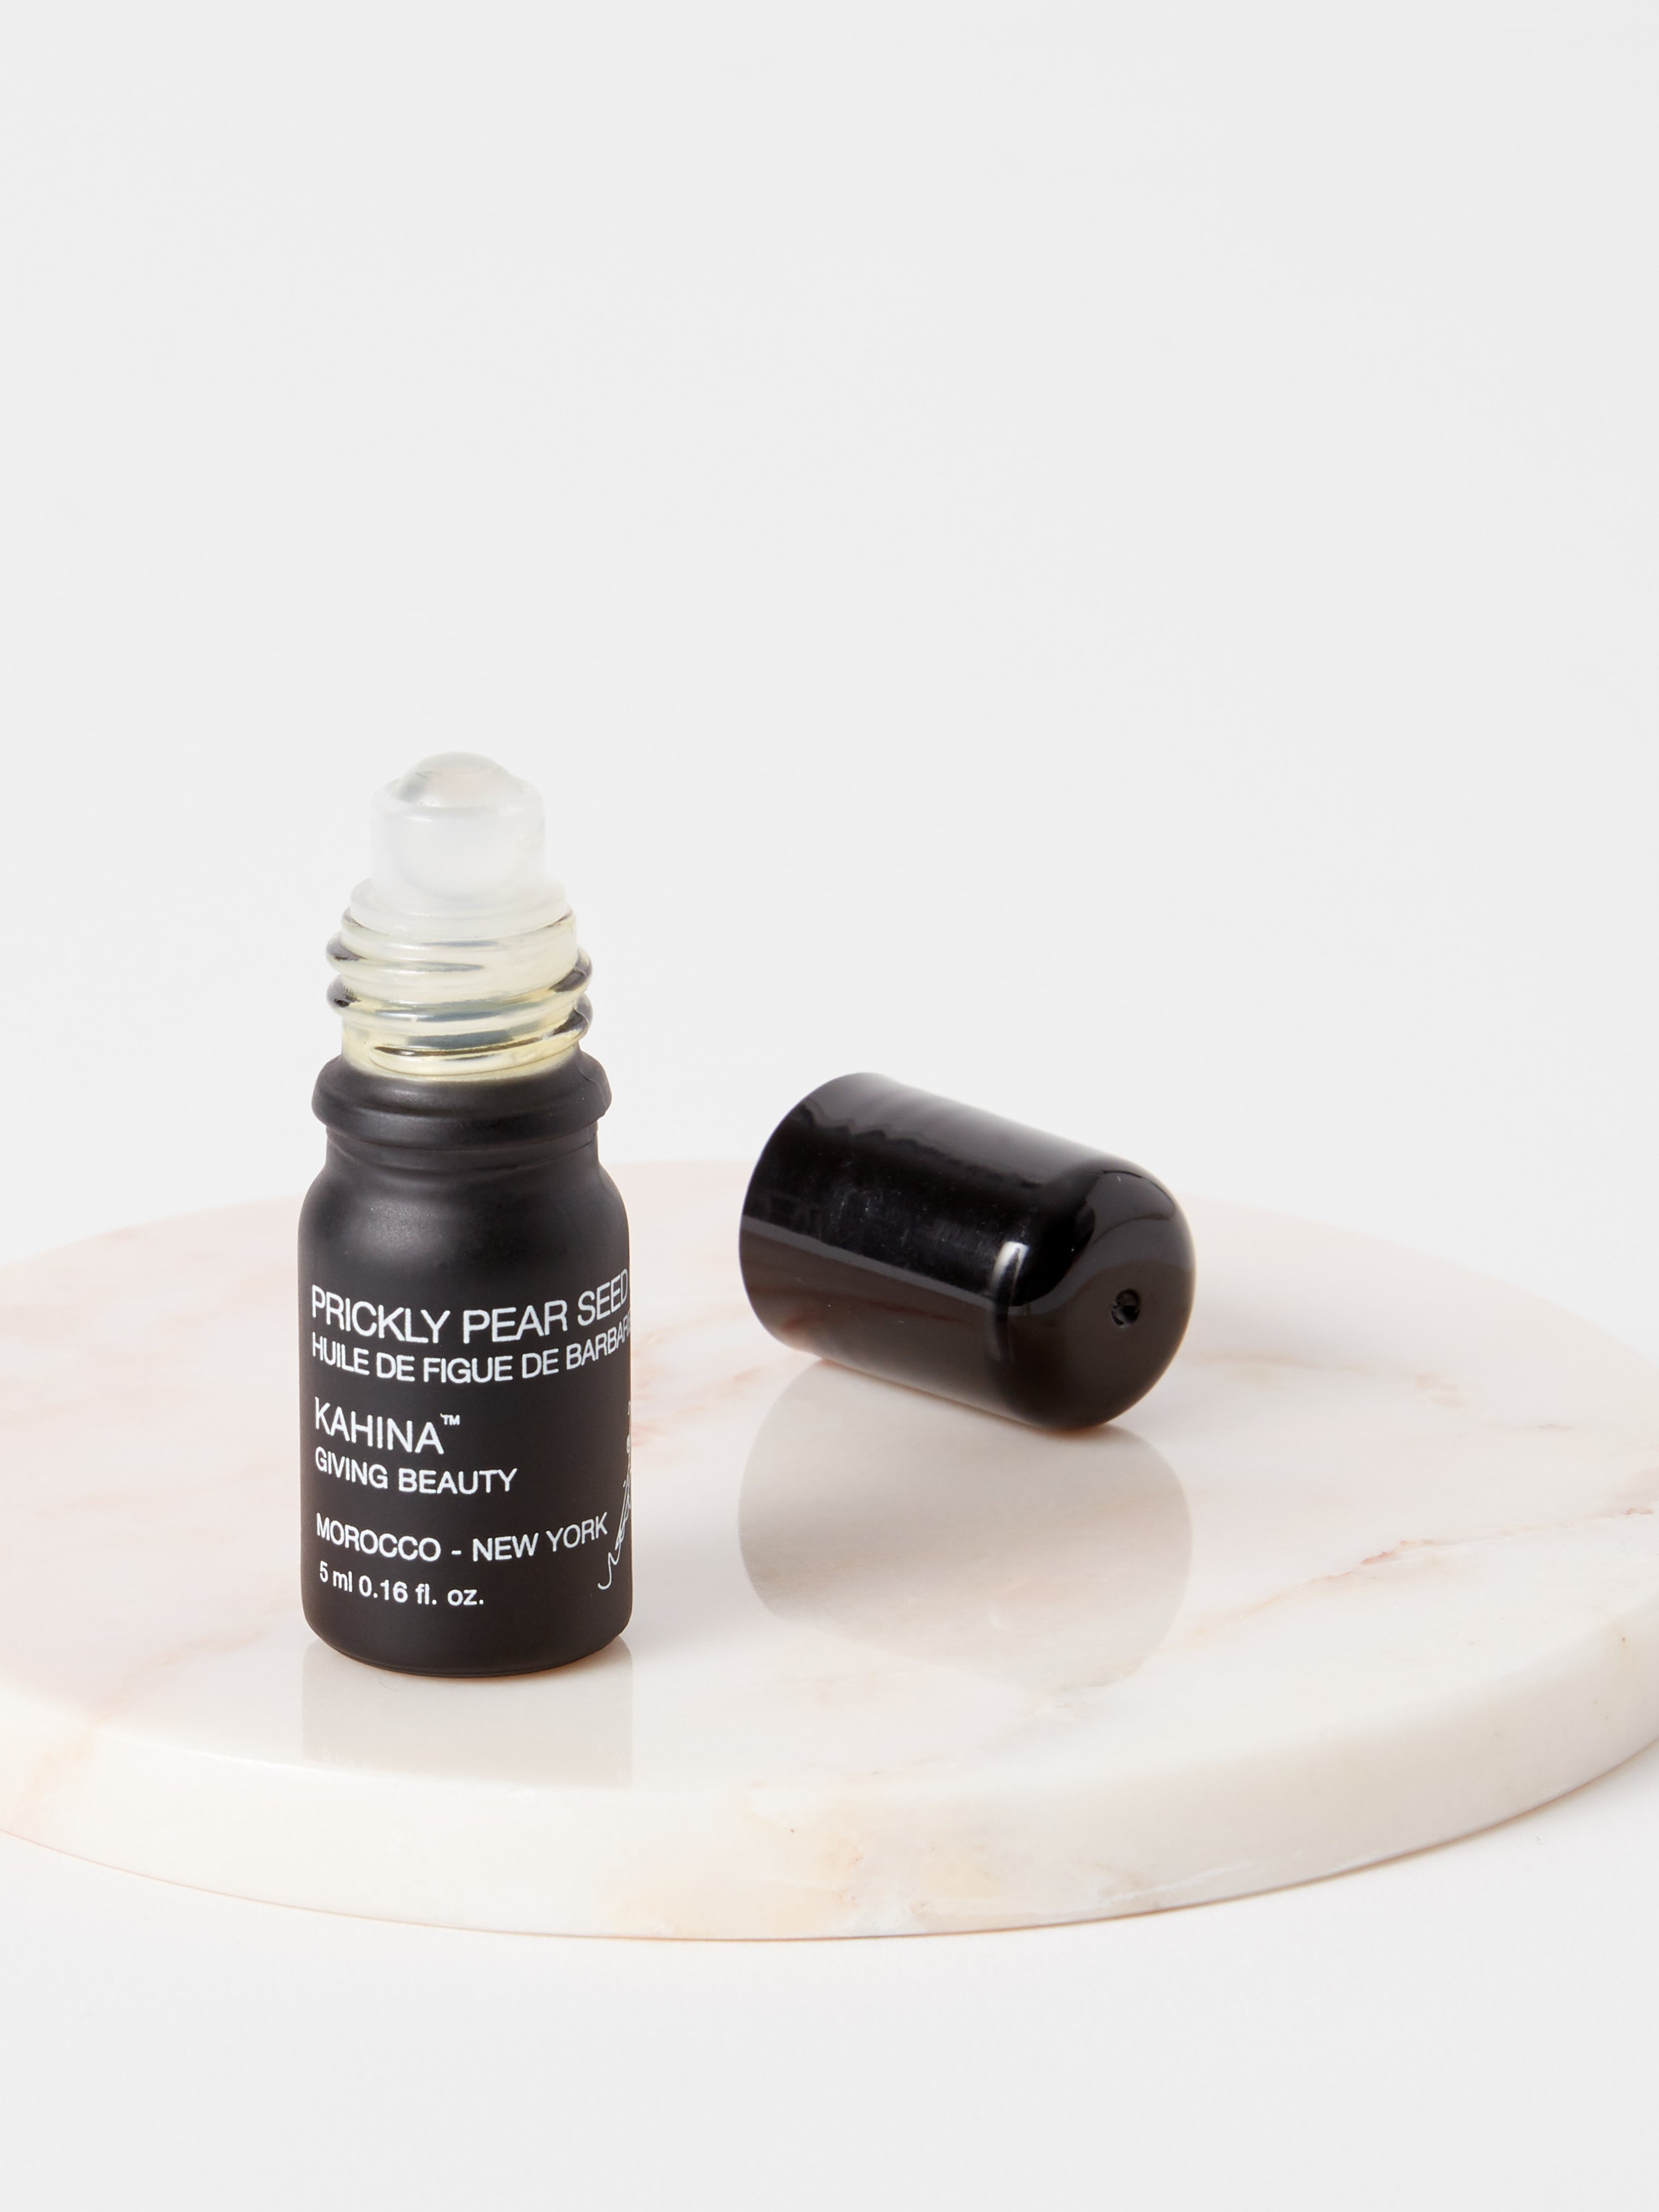 KAHINA GIVING BEAUTY KAHINA GIVING BEAUTY PRICKLY PEAR SEED OIL ROLLER BALL